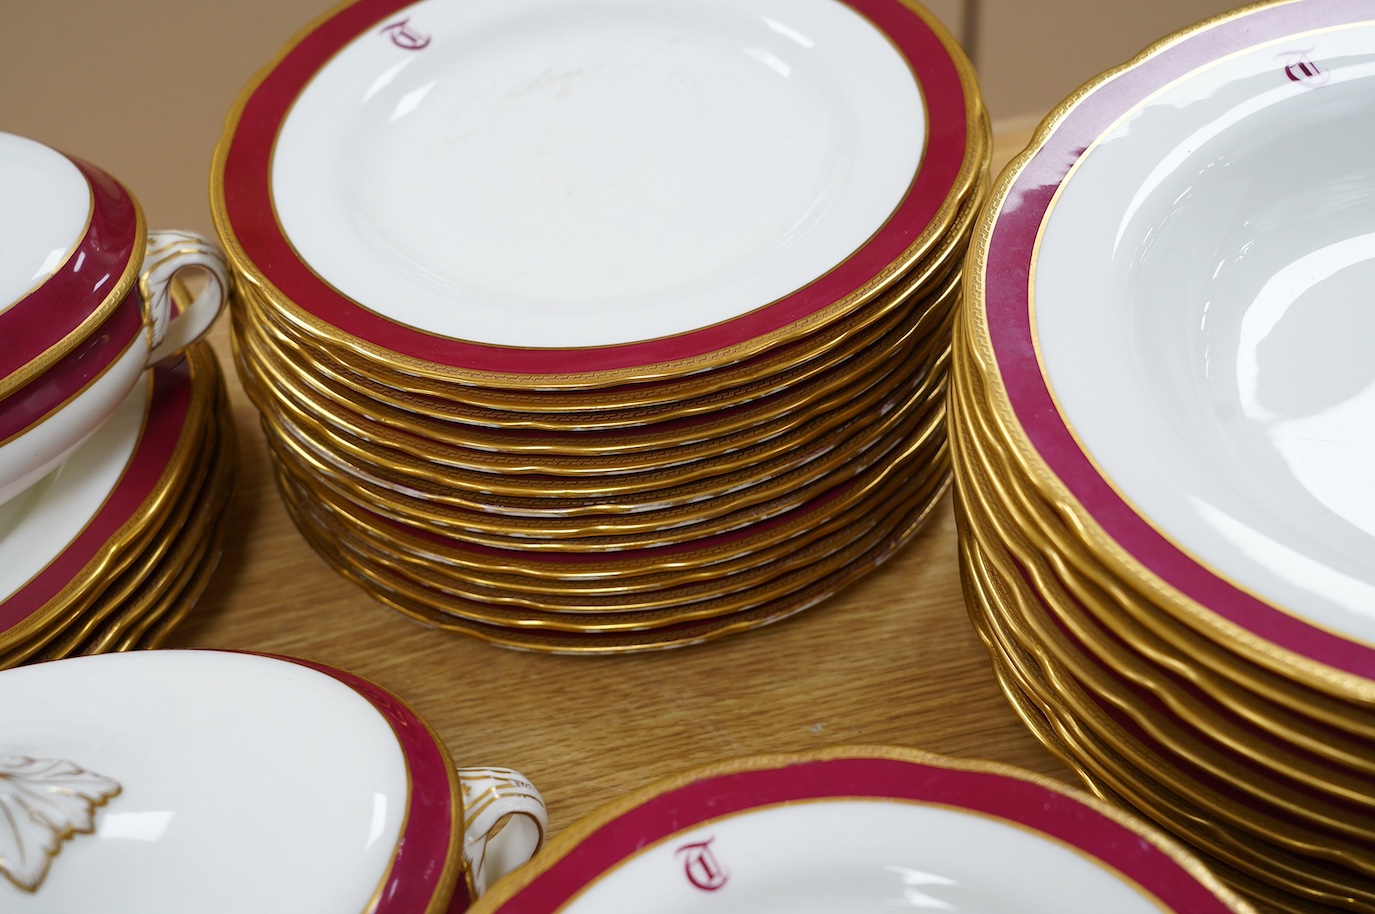 An extensive T. Goode & Co. Wedgwood red and gilt bordered dinner service, monogrammed 